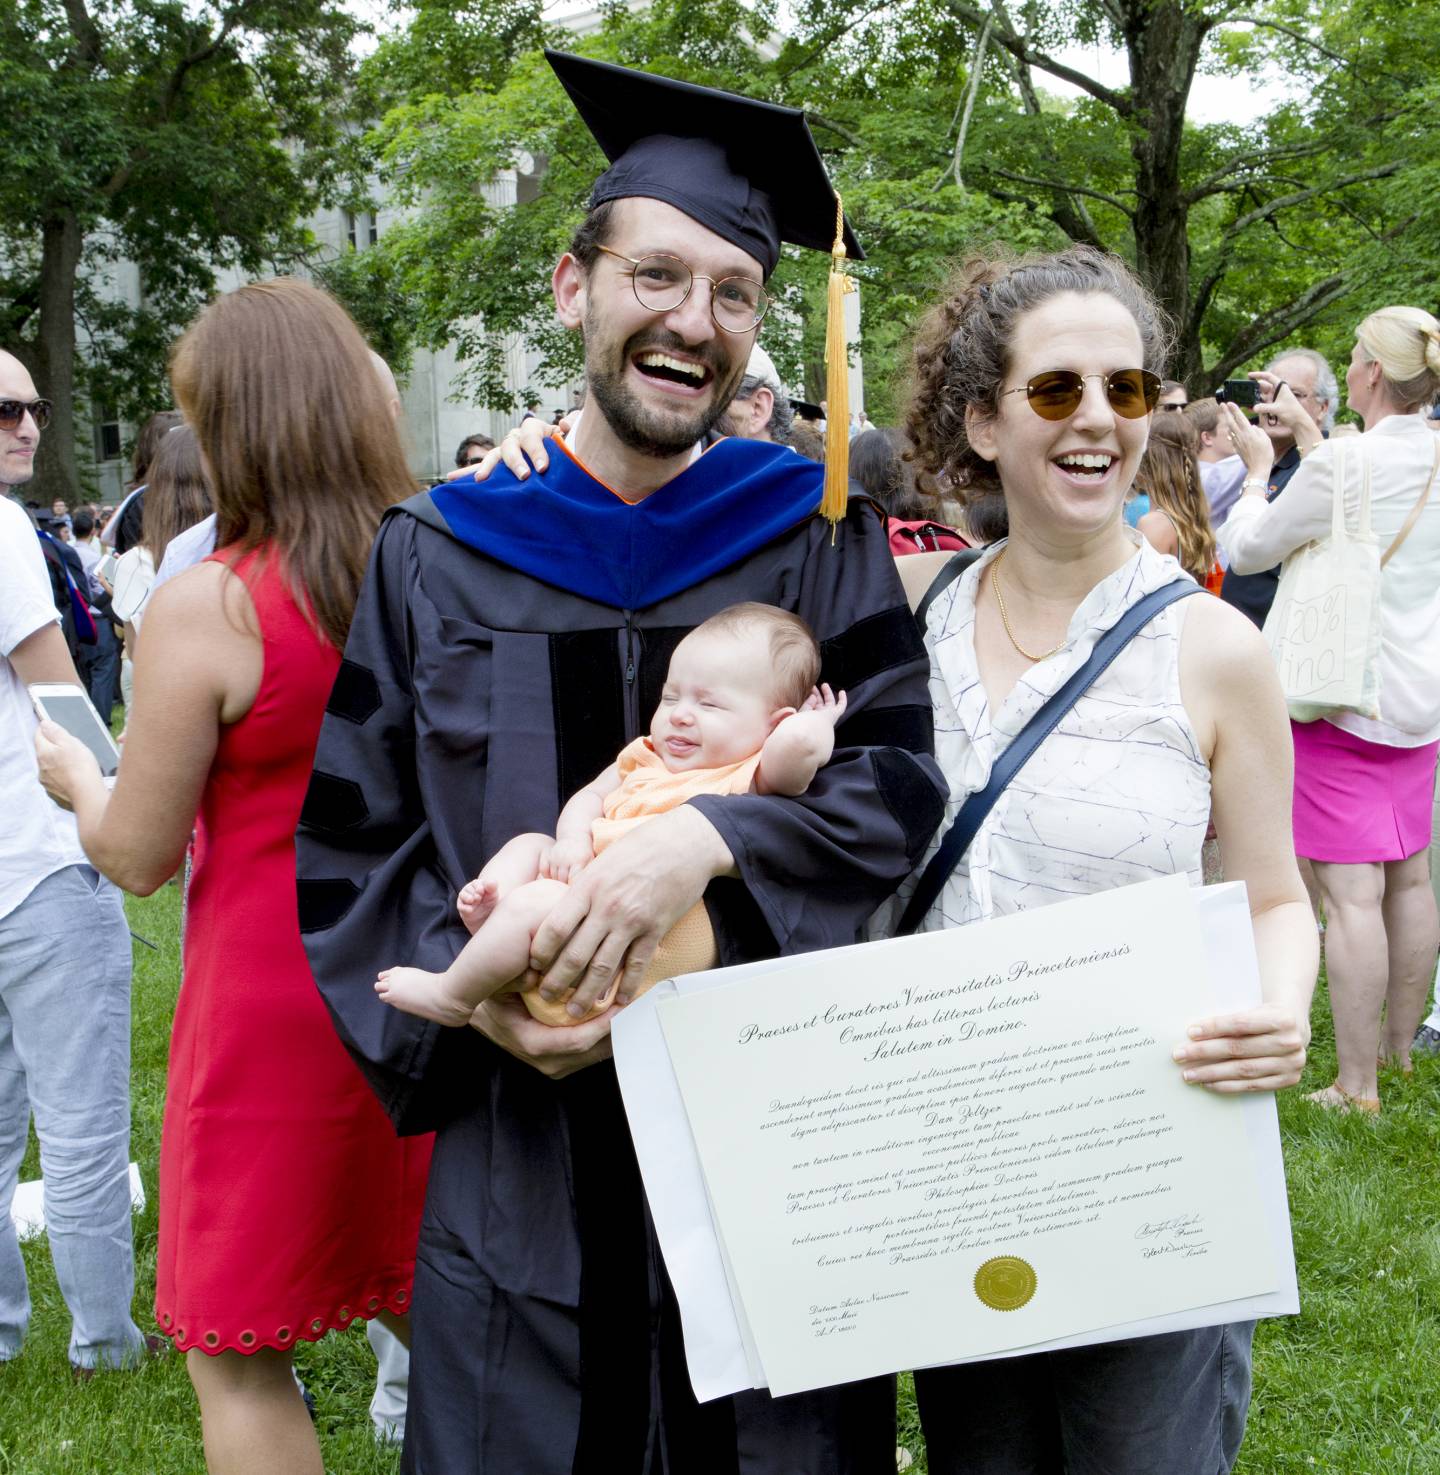 Dan Zeltzer, who earned a Ph.D. in economics, celebrates his graduation with his wife, Efrat Kedem, and their 3-month-old daughter, Amalia